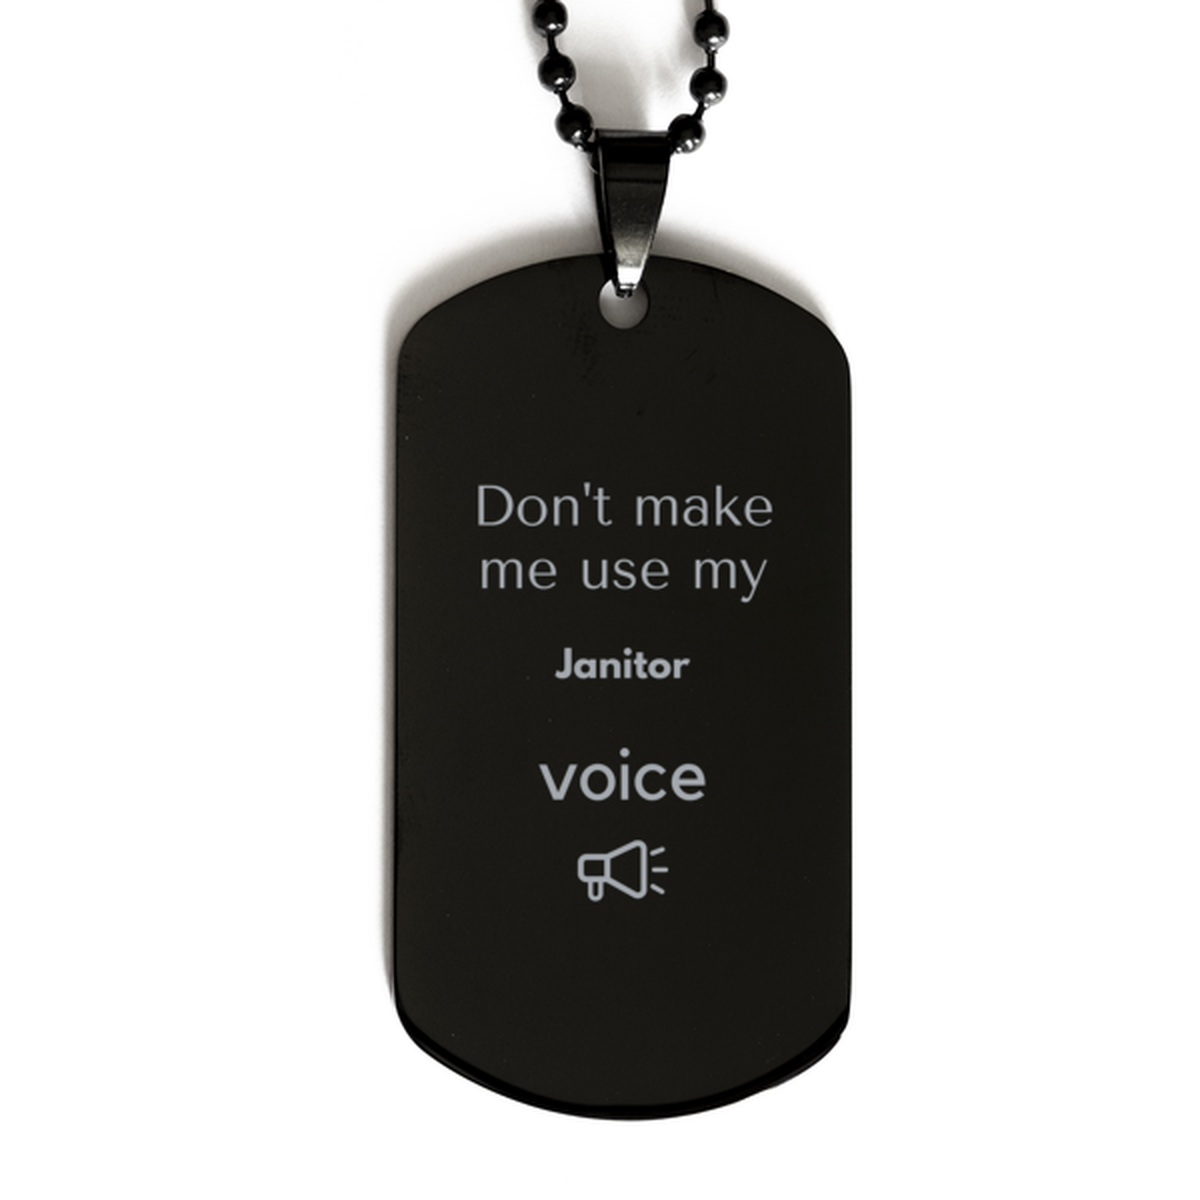 Don't make me use my Janitor voice, Sarcasm Janitor Gifts, Christmas Janitor Black Dog Tag Birthday Unique Gifts For Janitor Coworkers, Men, Women, Colleague, Friends